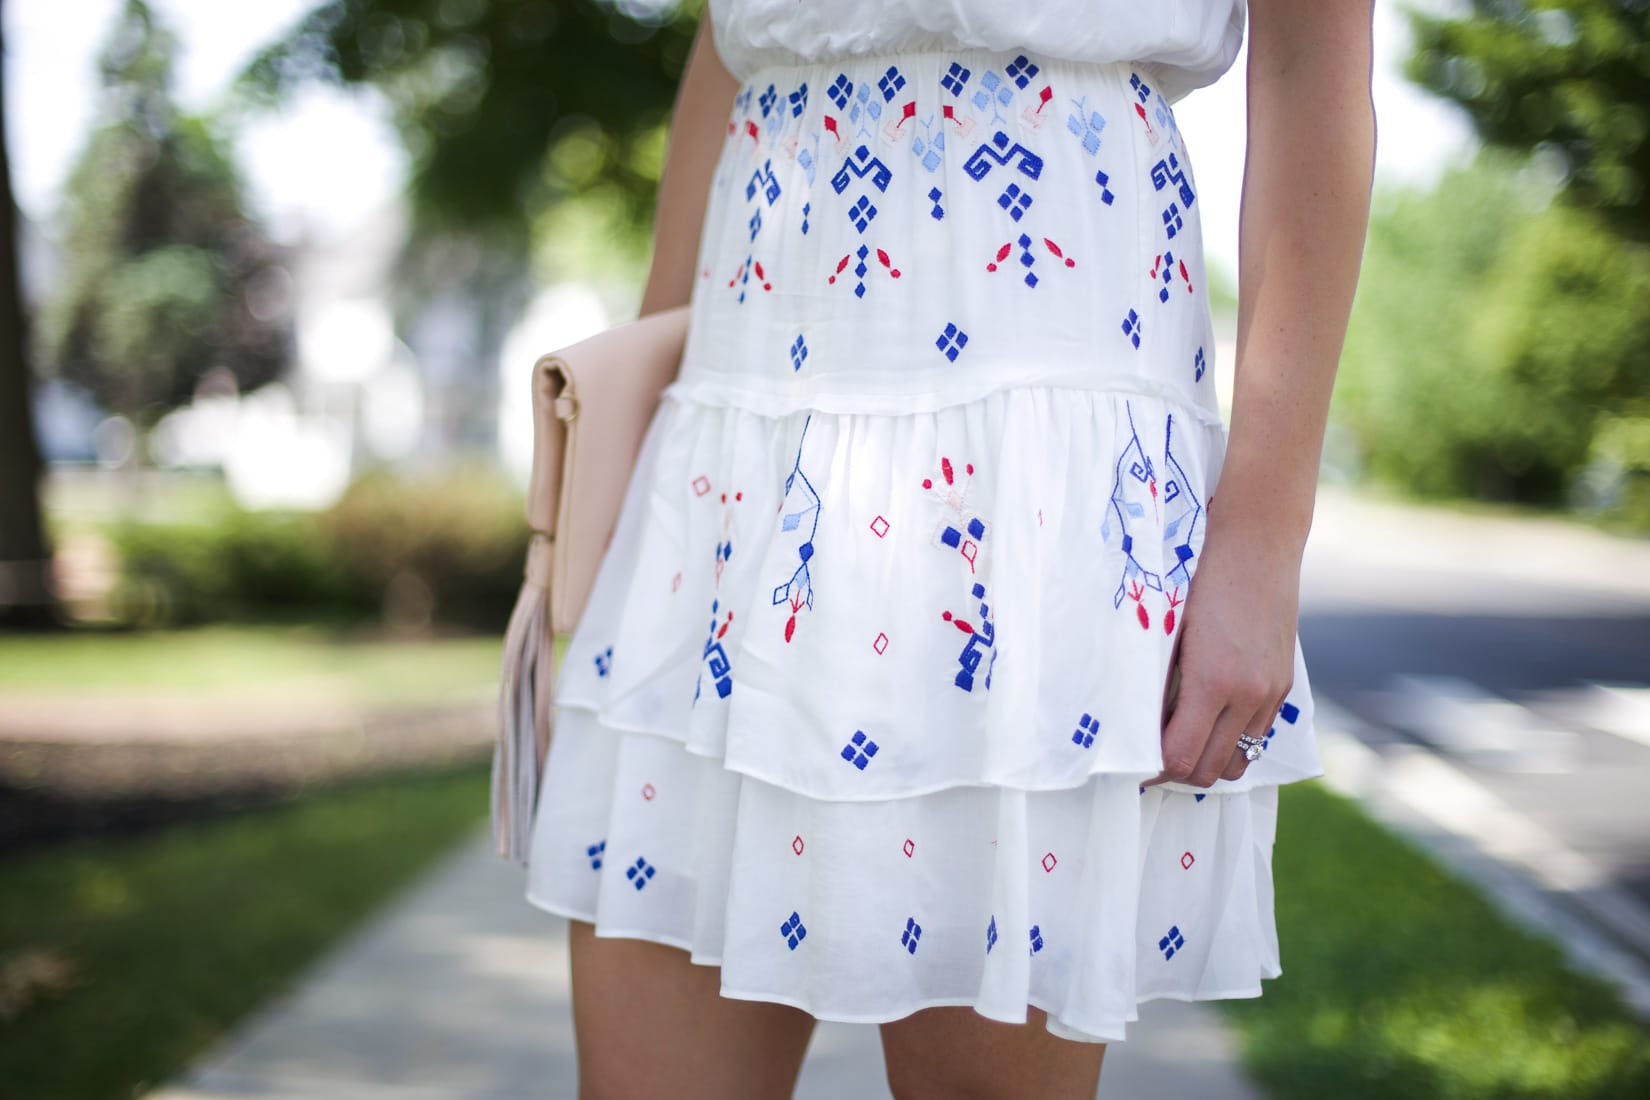 embroidered dress